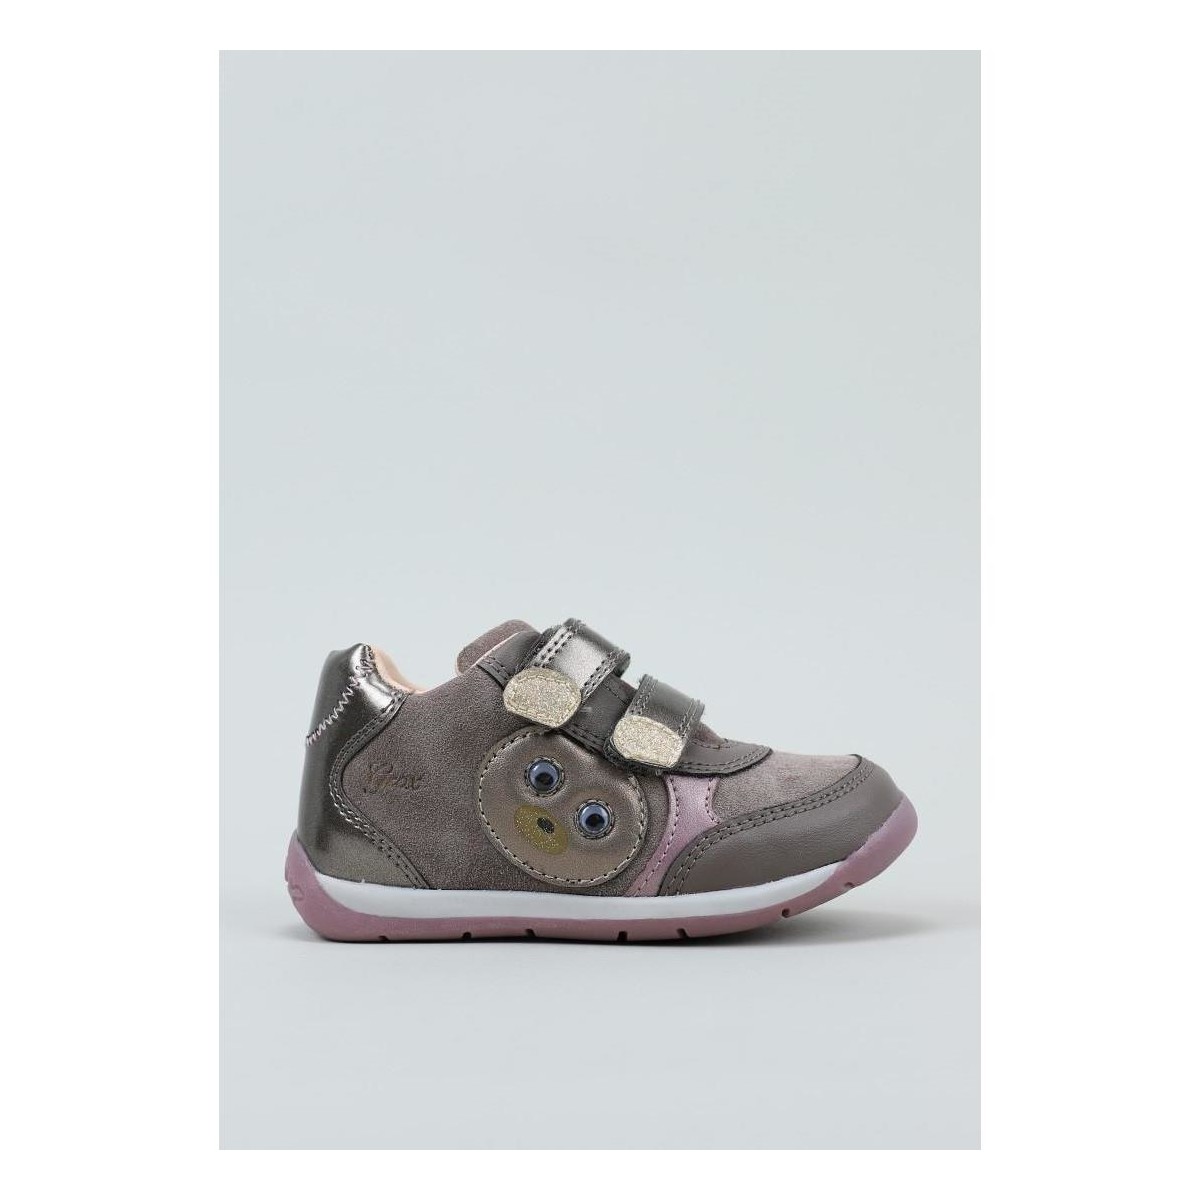 Chaussures Fille Baskets montantes Geox B EACH GIRL B Gris